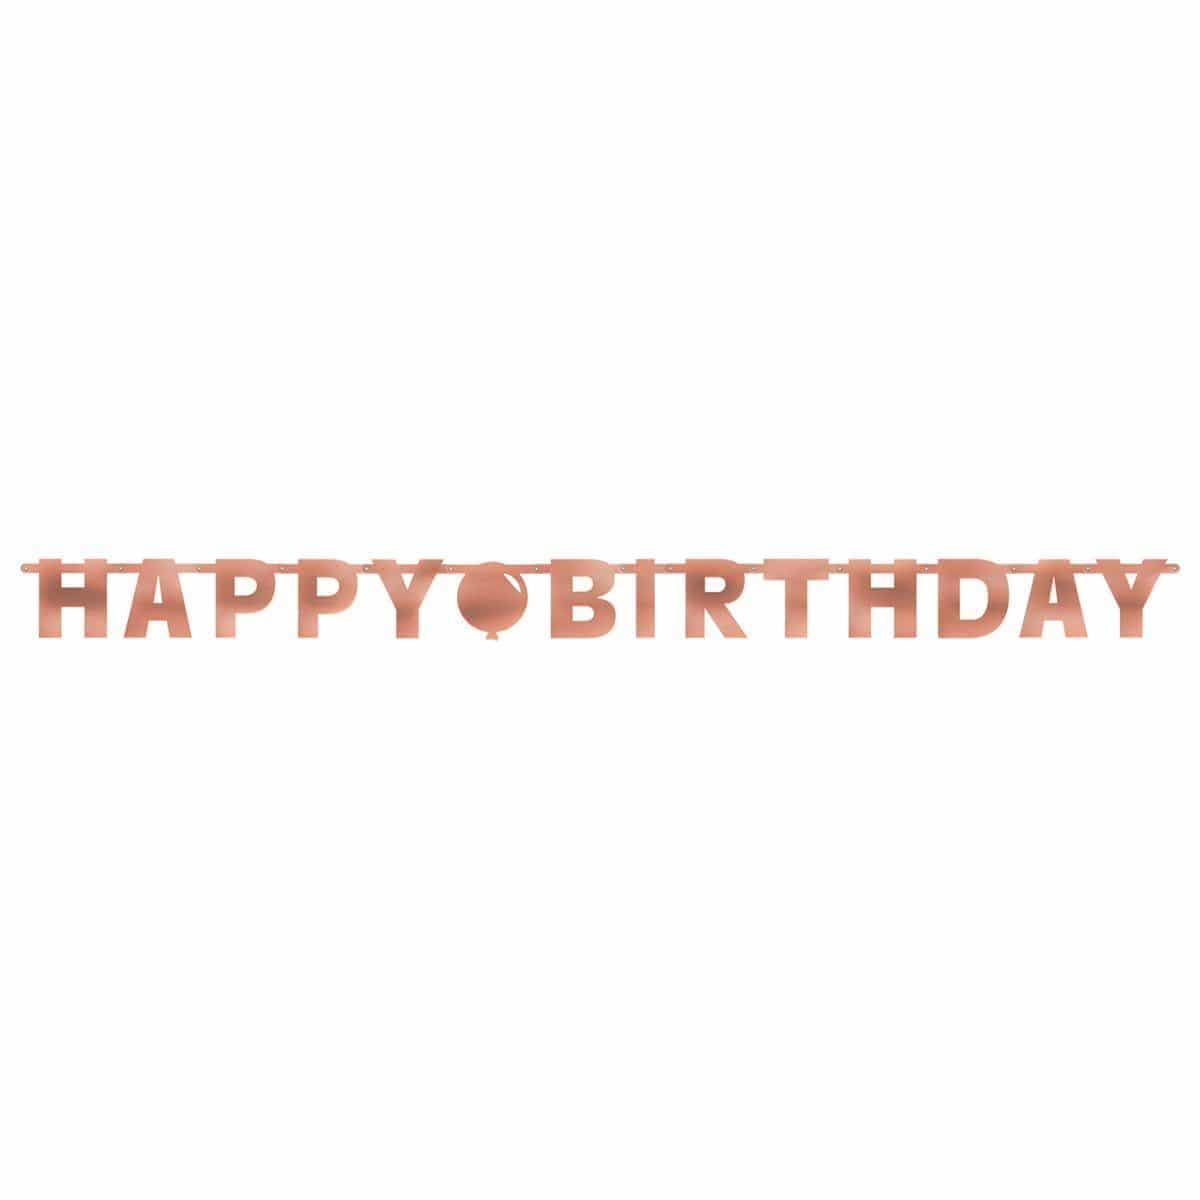 Buy General Birthday Blush Birthday - Letter Banner sold at Party Expert